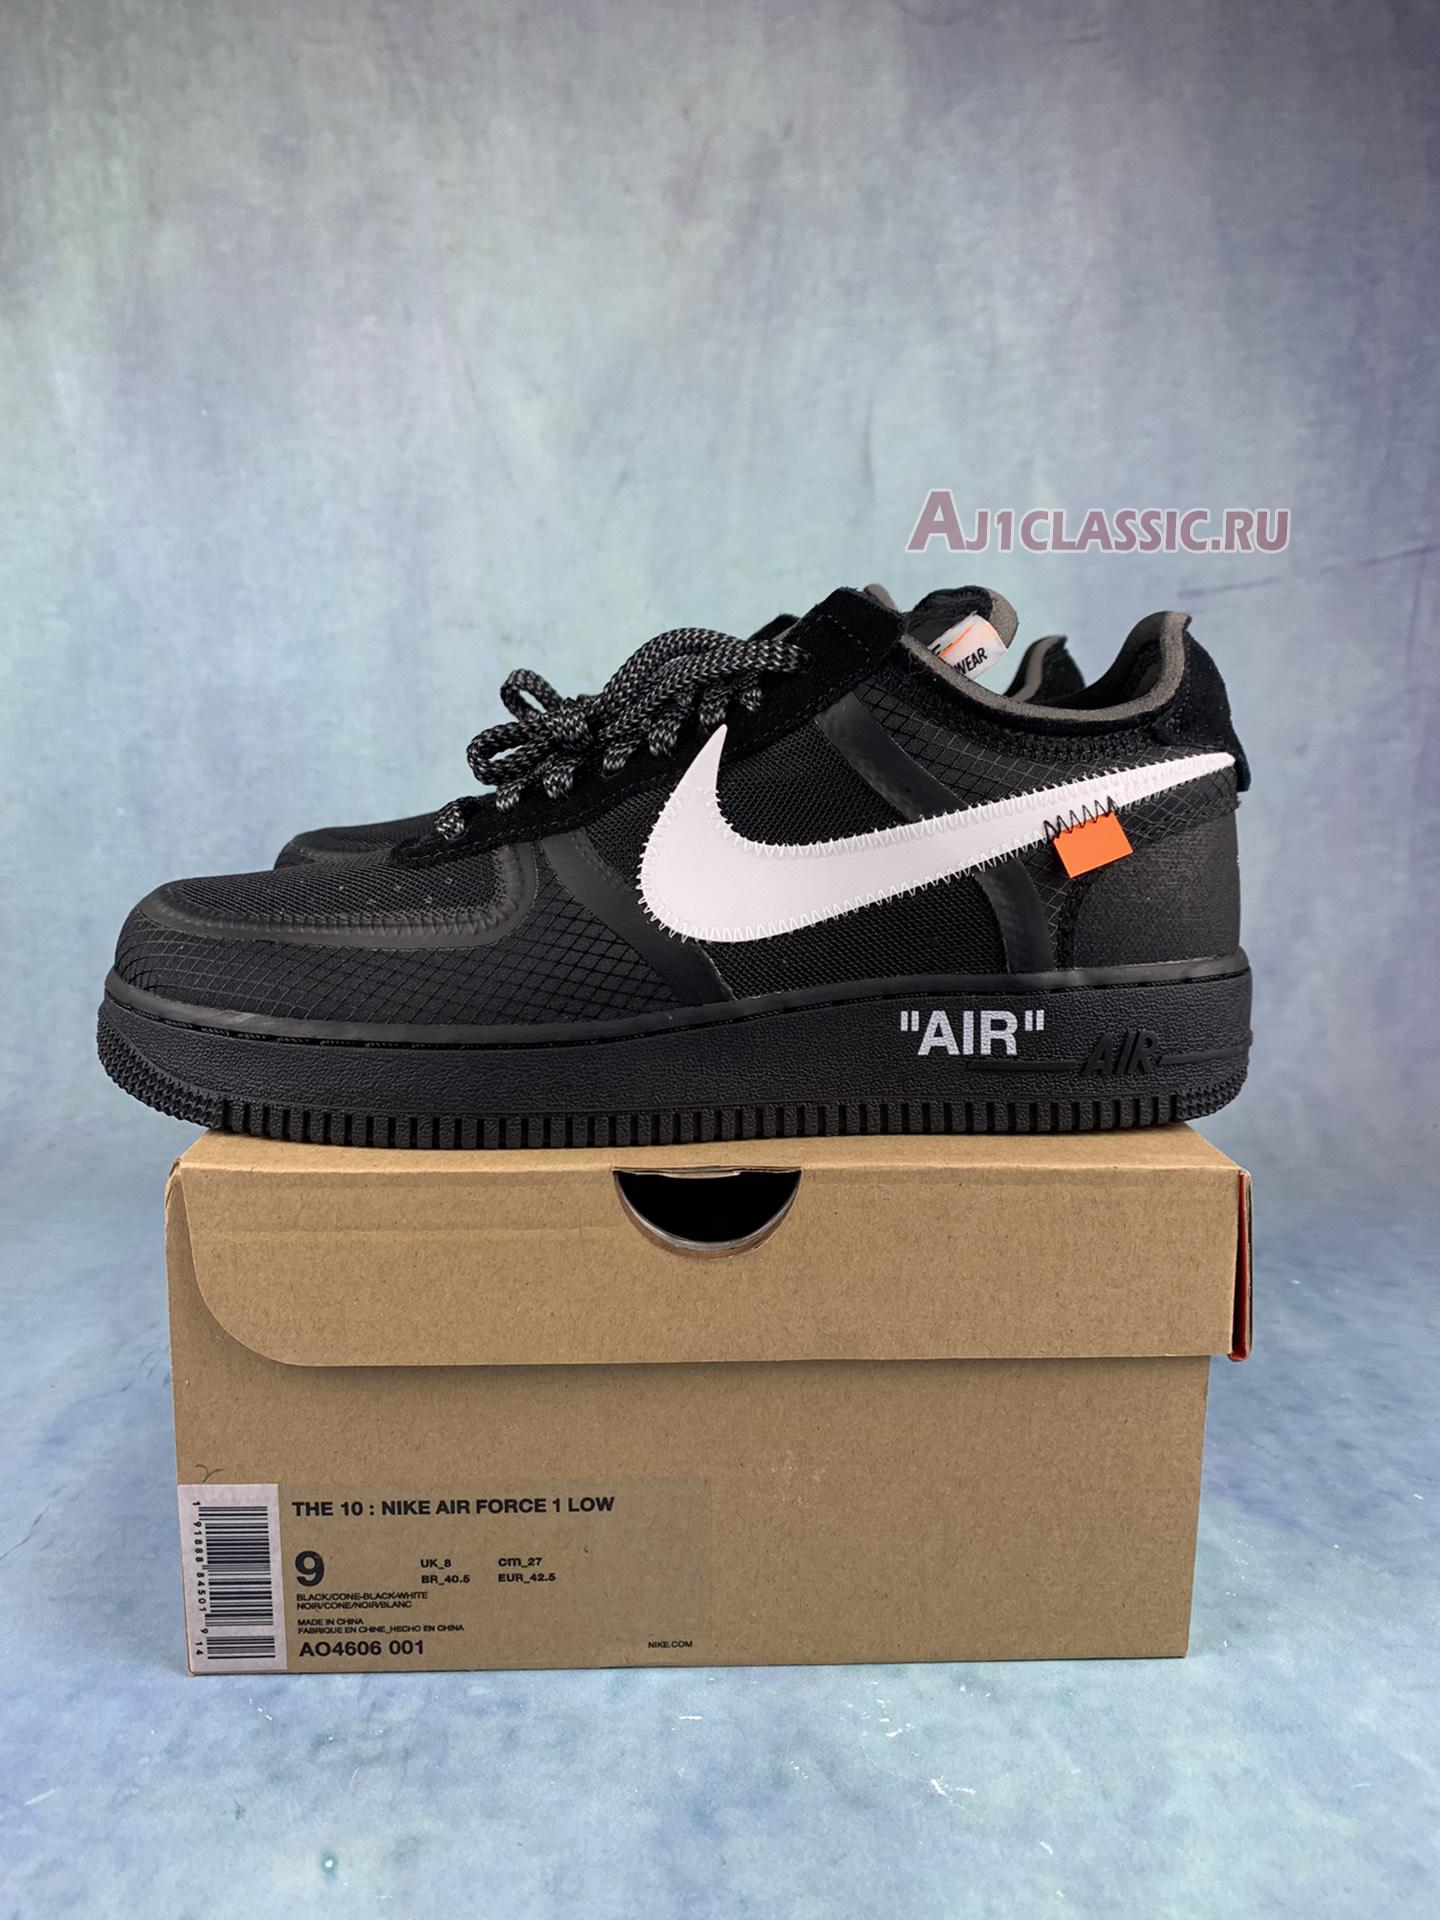 Off-White x Nike Air Force 1 Low "Black" AO4606-001-2